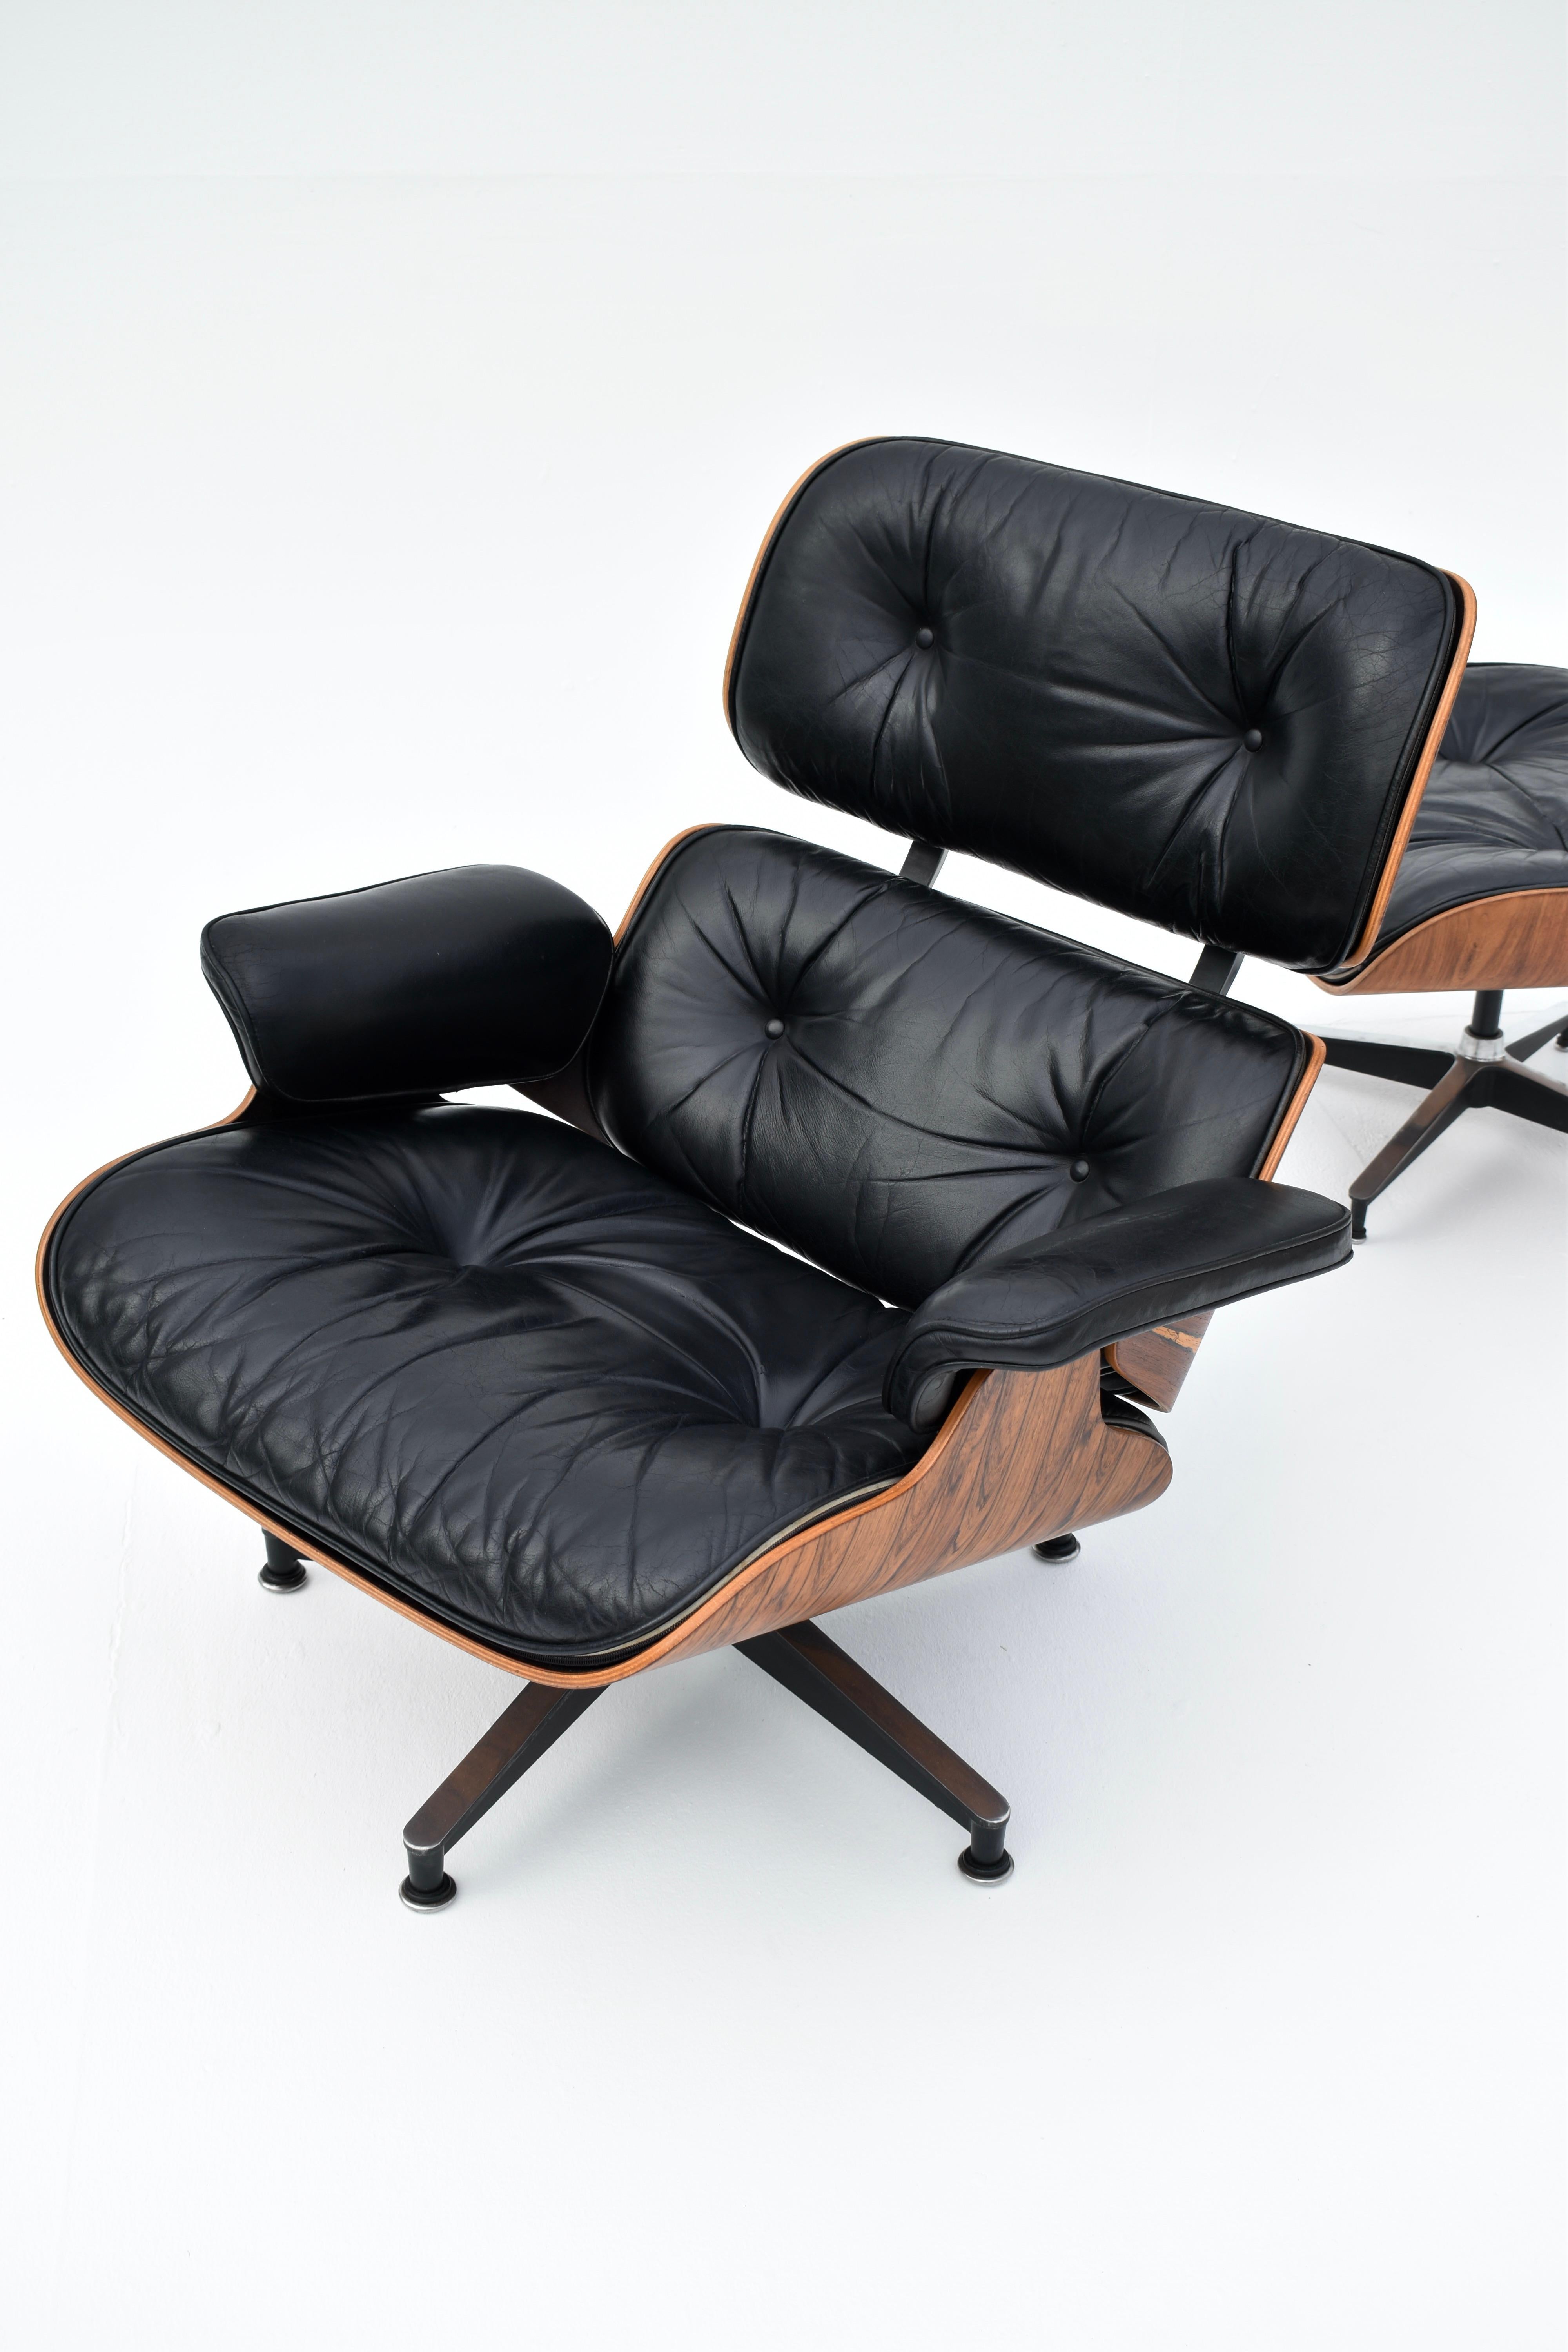 Original Eames Lounge Chair & Ottoman finished in Brazilian rosewood and black leather for Herman Miller.

A particularly nice example exhibiting very dramatic and attractive figuring to the rosewood veneers and gorgeous patina to the cushions. The